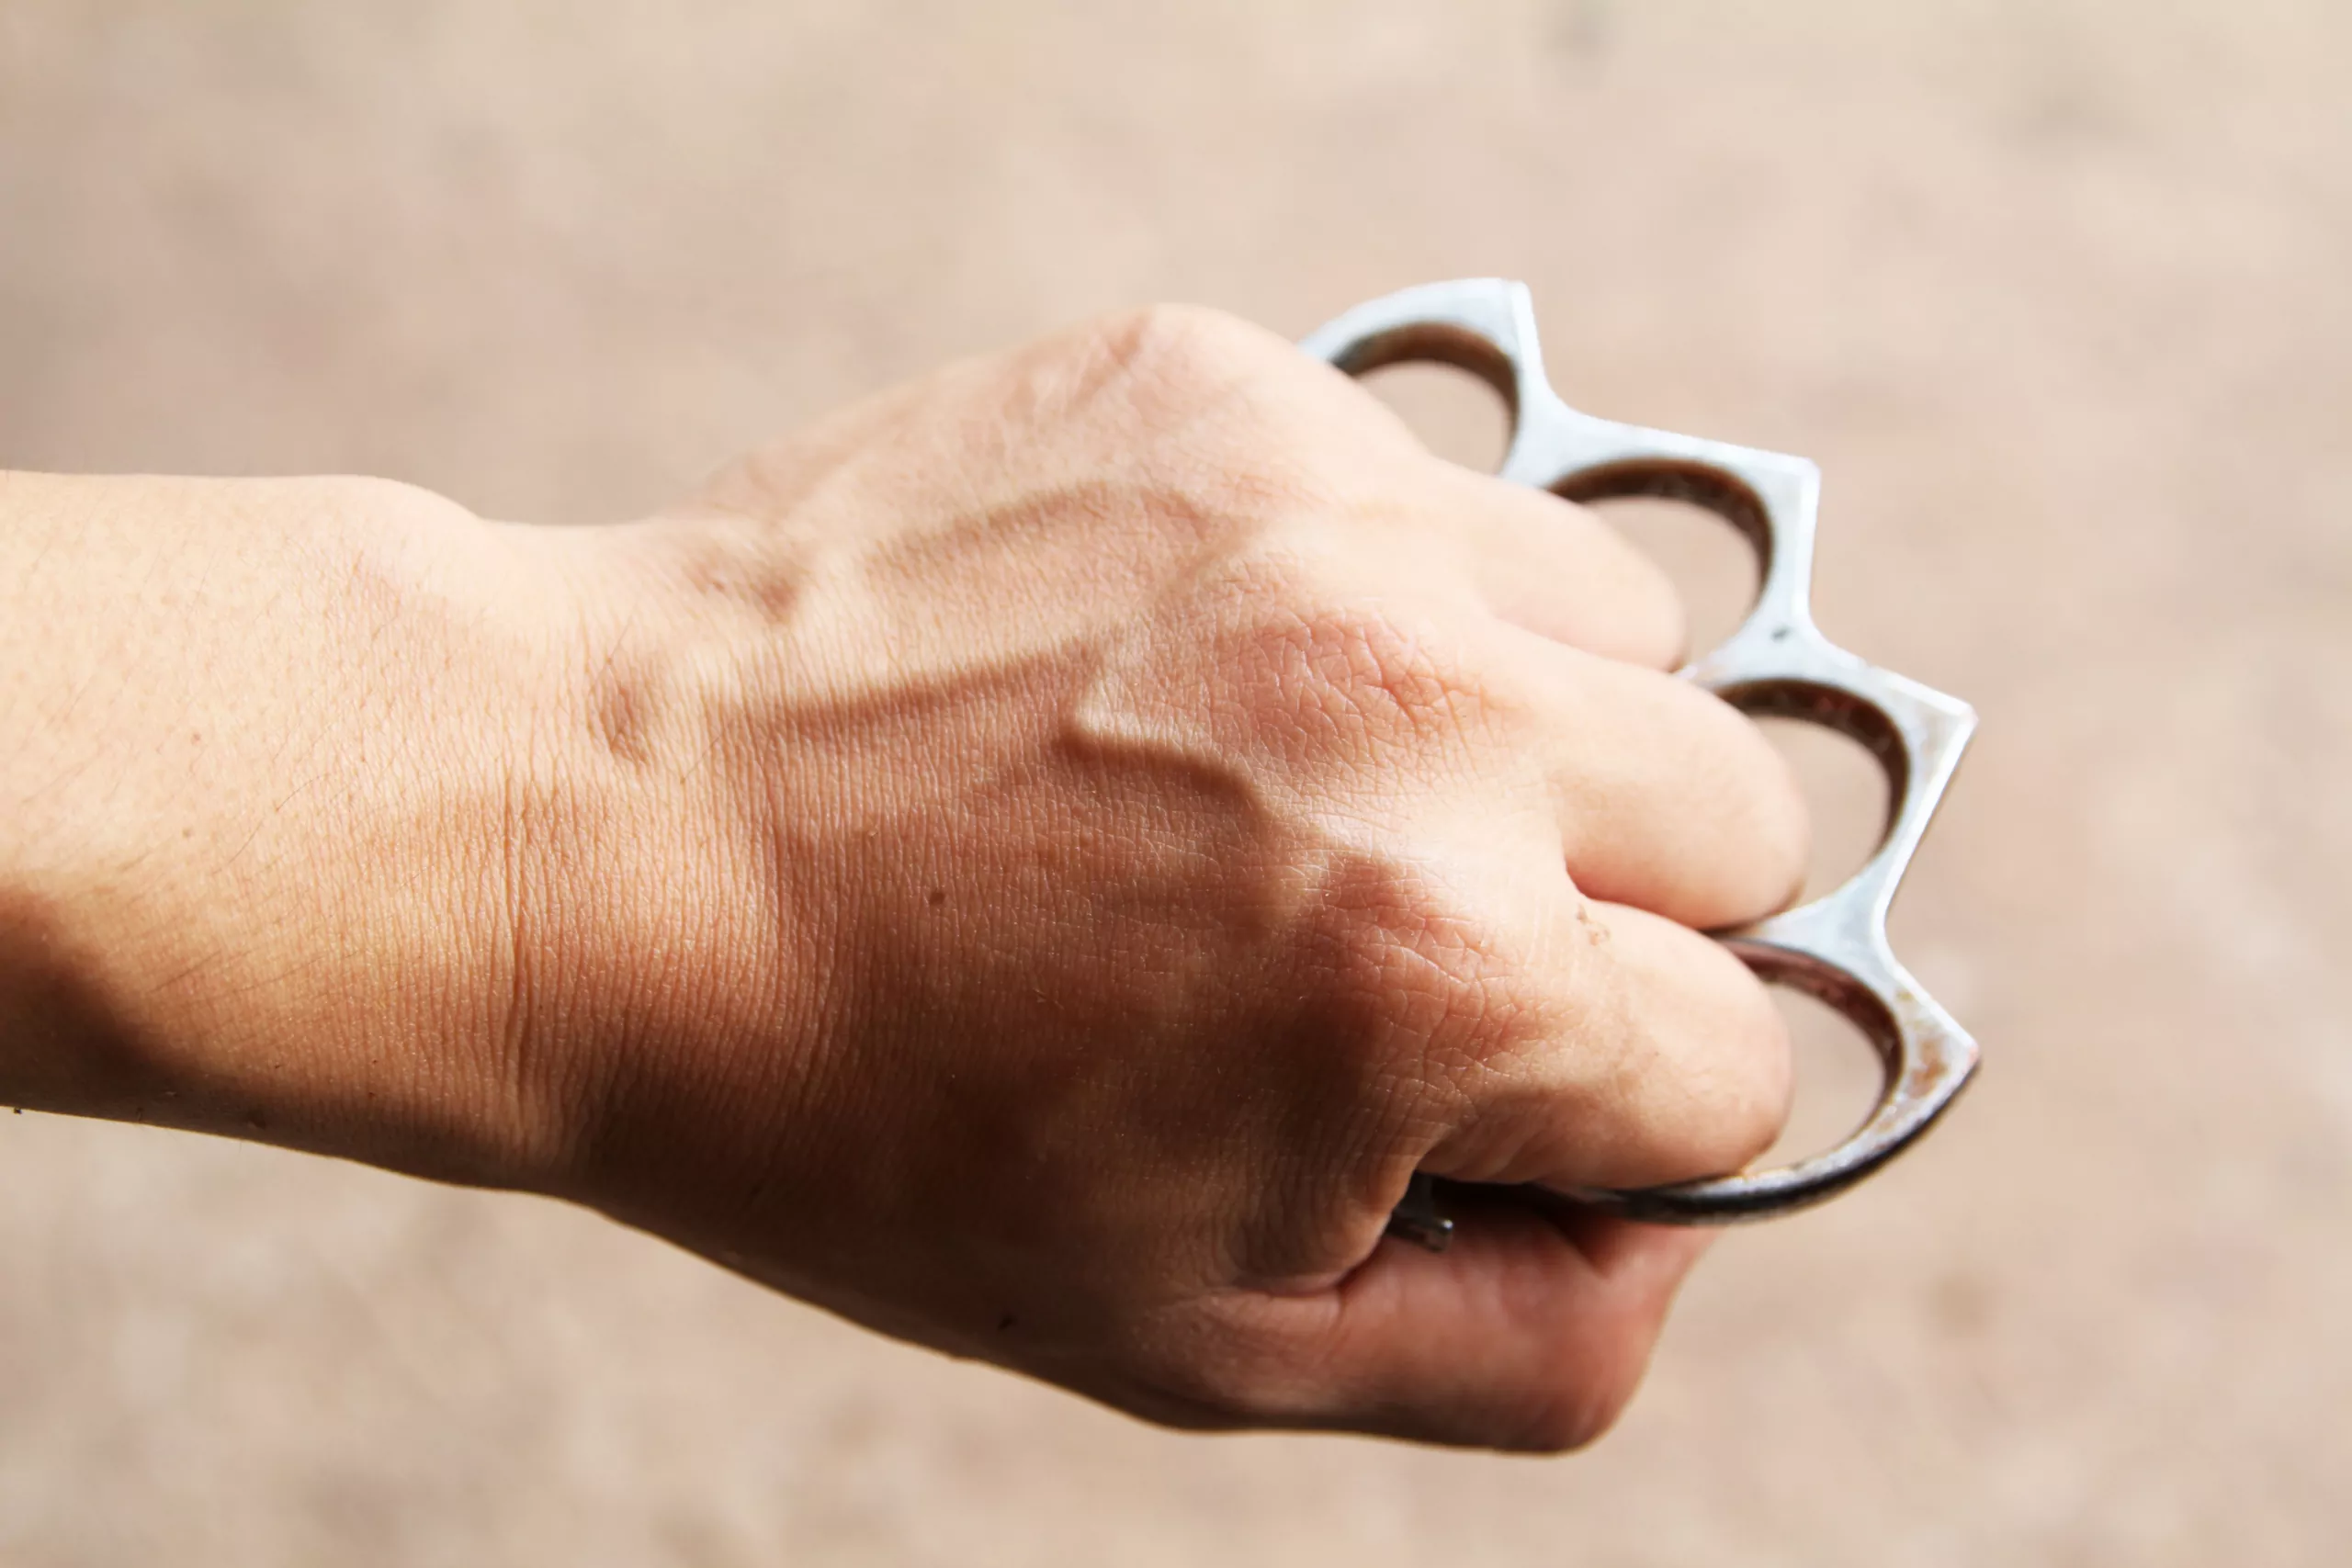 Why are brass knuckles considered an effective weapon? Won't their